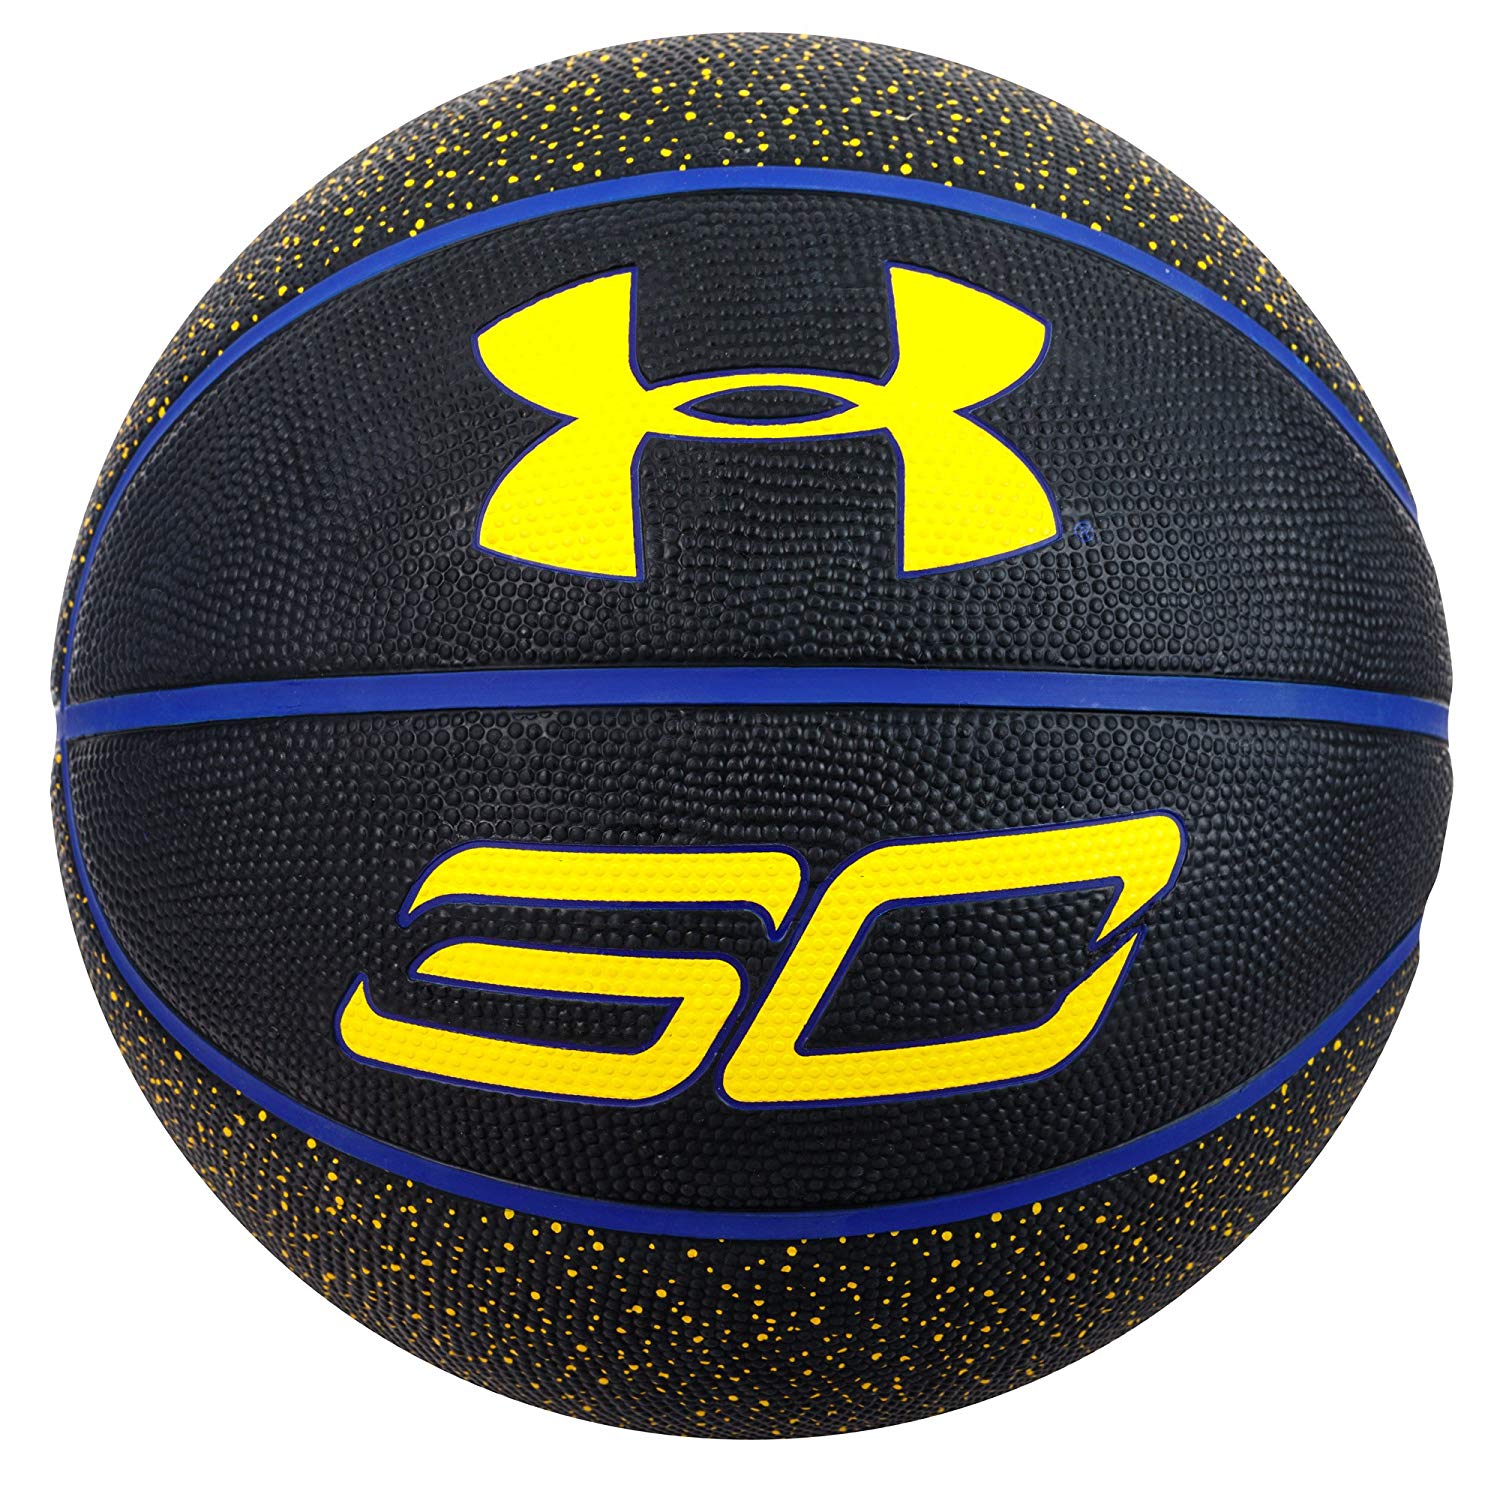 Stephen Curry Logo - Amazon.com : Under Armour Steph Curry Basketball, Official Size 7 ...